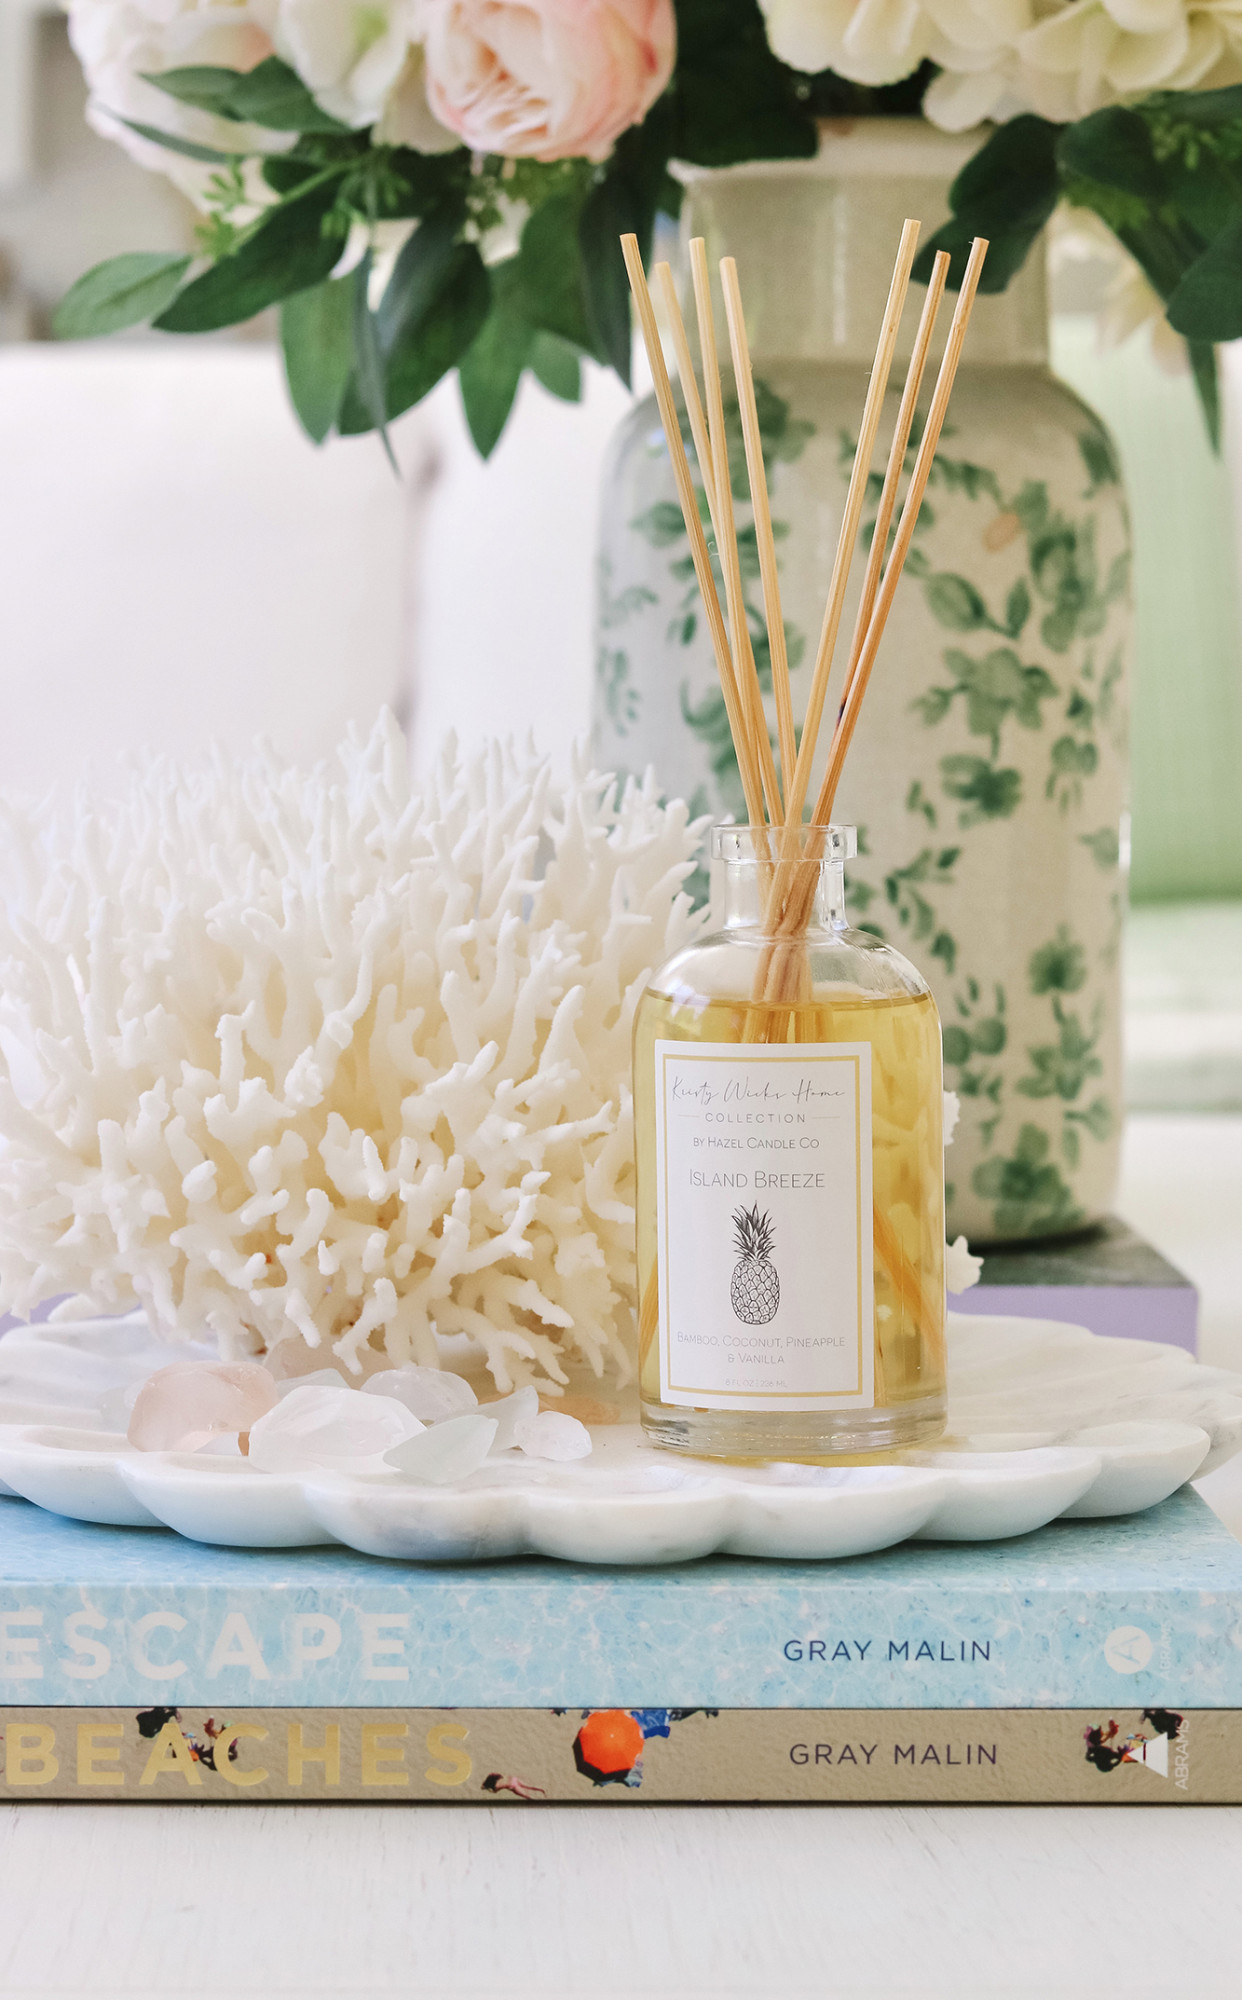 My Summer Diffuser is now available for purchase | Kristy Wicks Home is now live! 100% of the profits of this diffuser is going to charity - so excited!